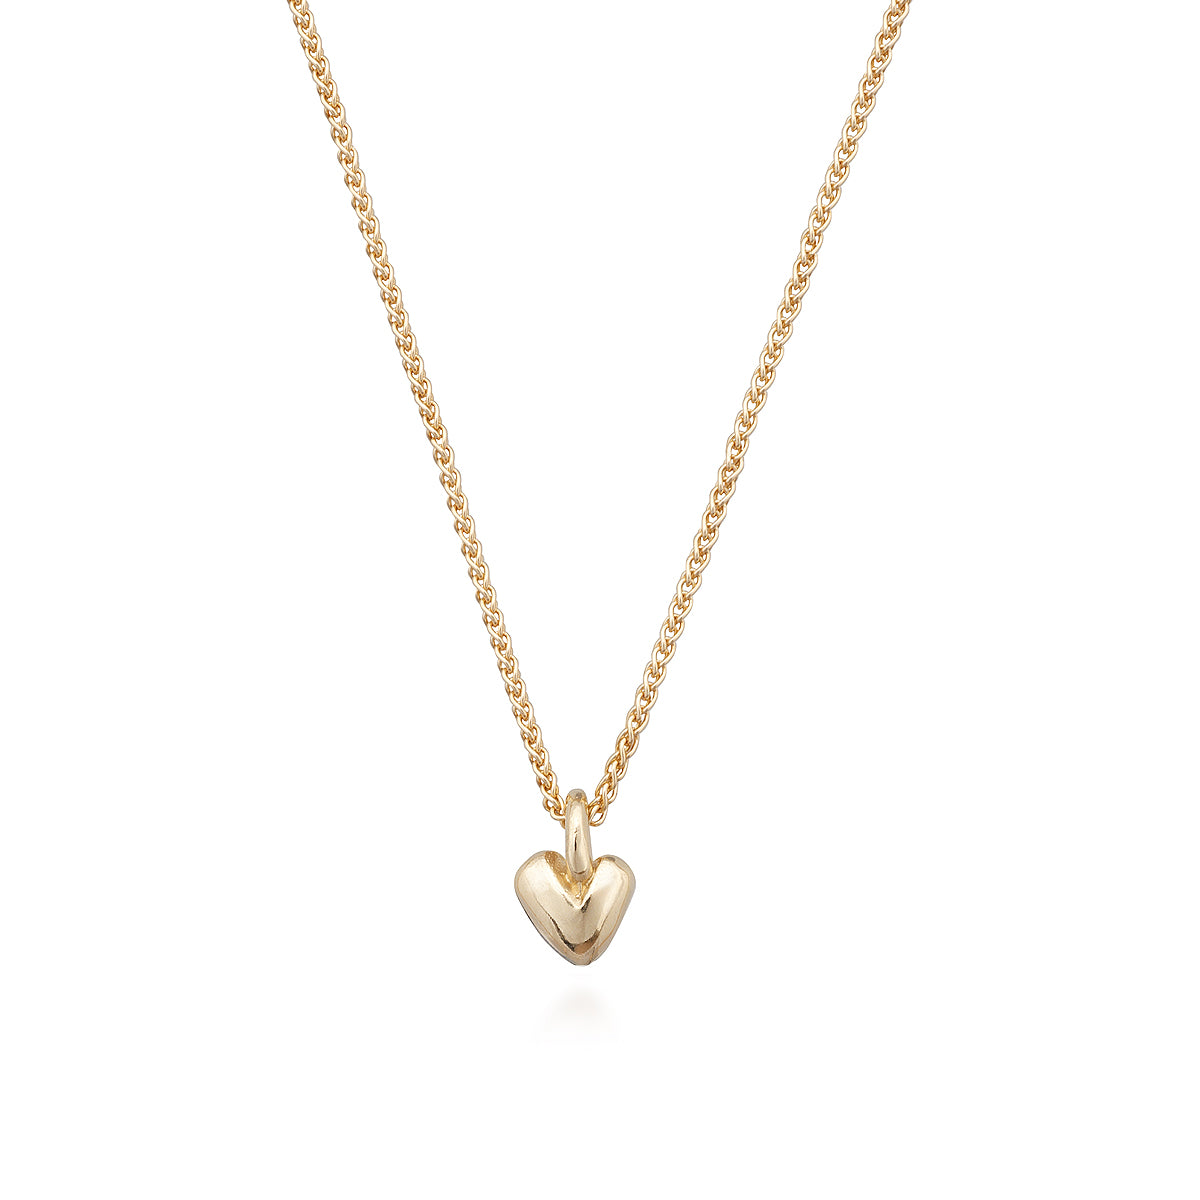 Solid yellow gold recycled heart pendant Scarlett Jewellery UK Slow fashion trends